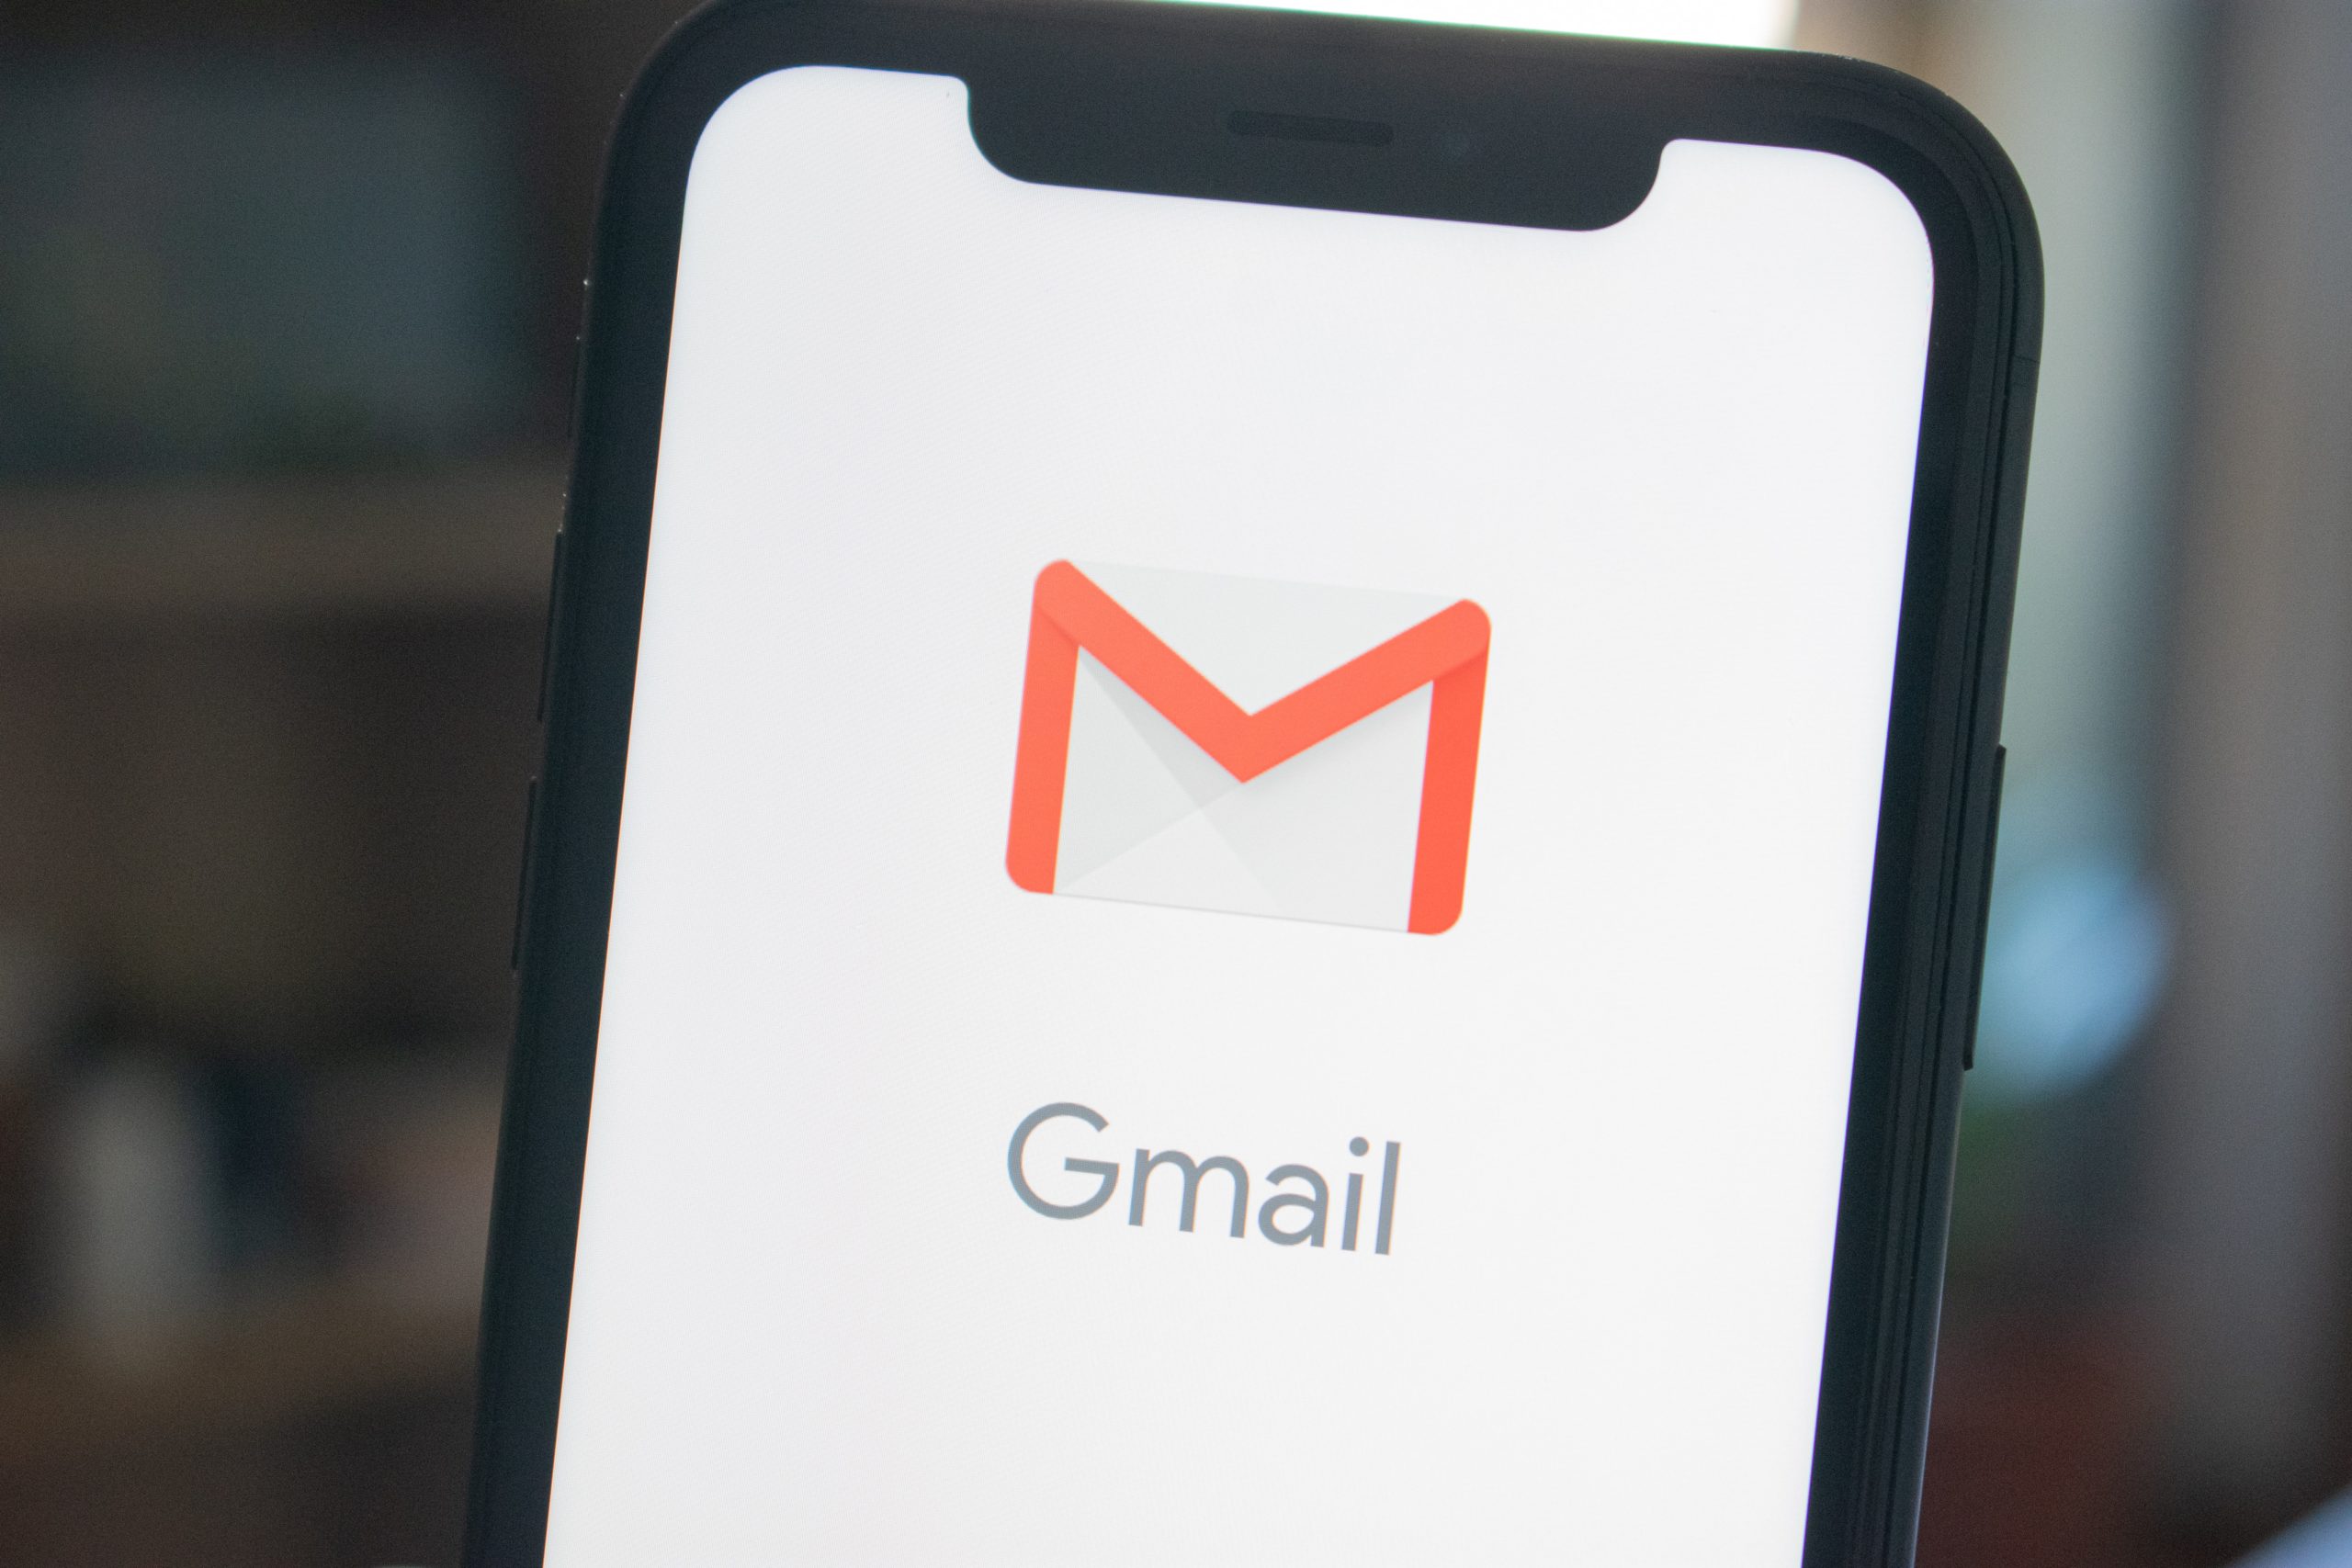 making email mobile friendly depicted in a picture with the Gmail icon on the screen of a smart phone